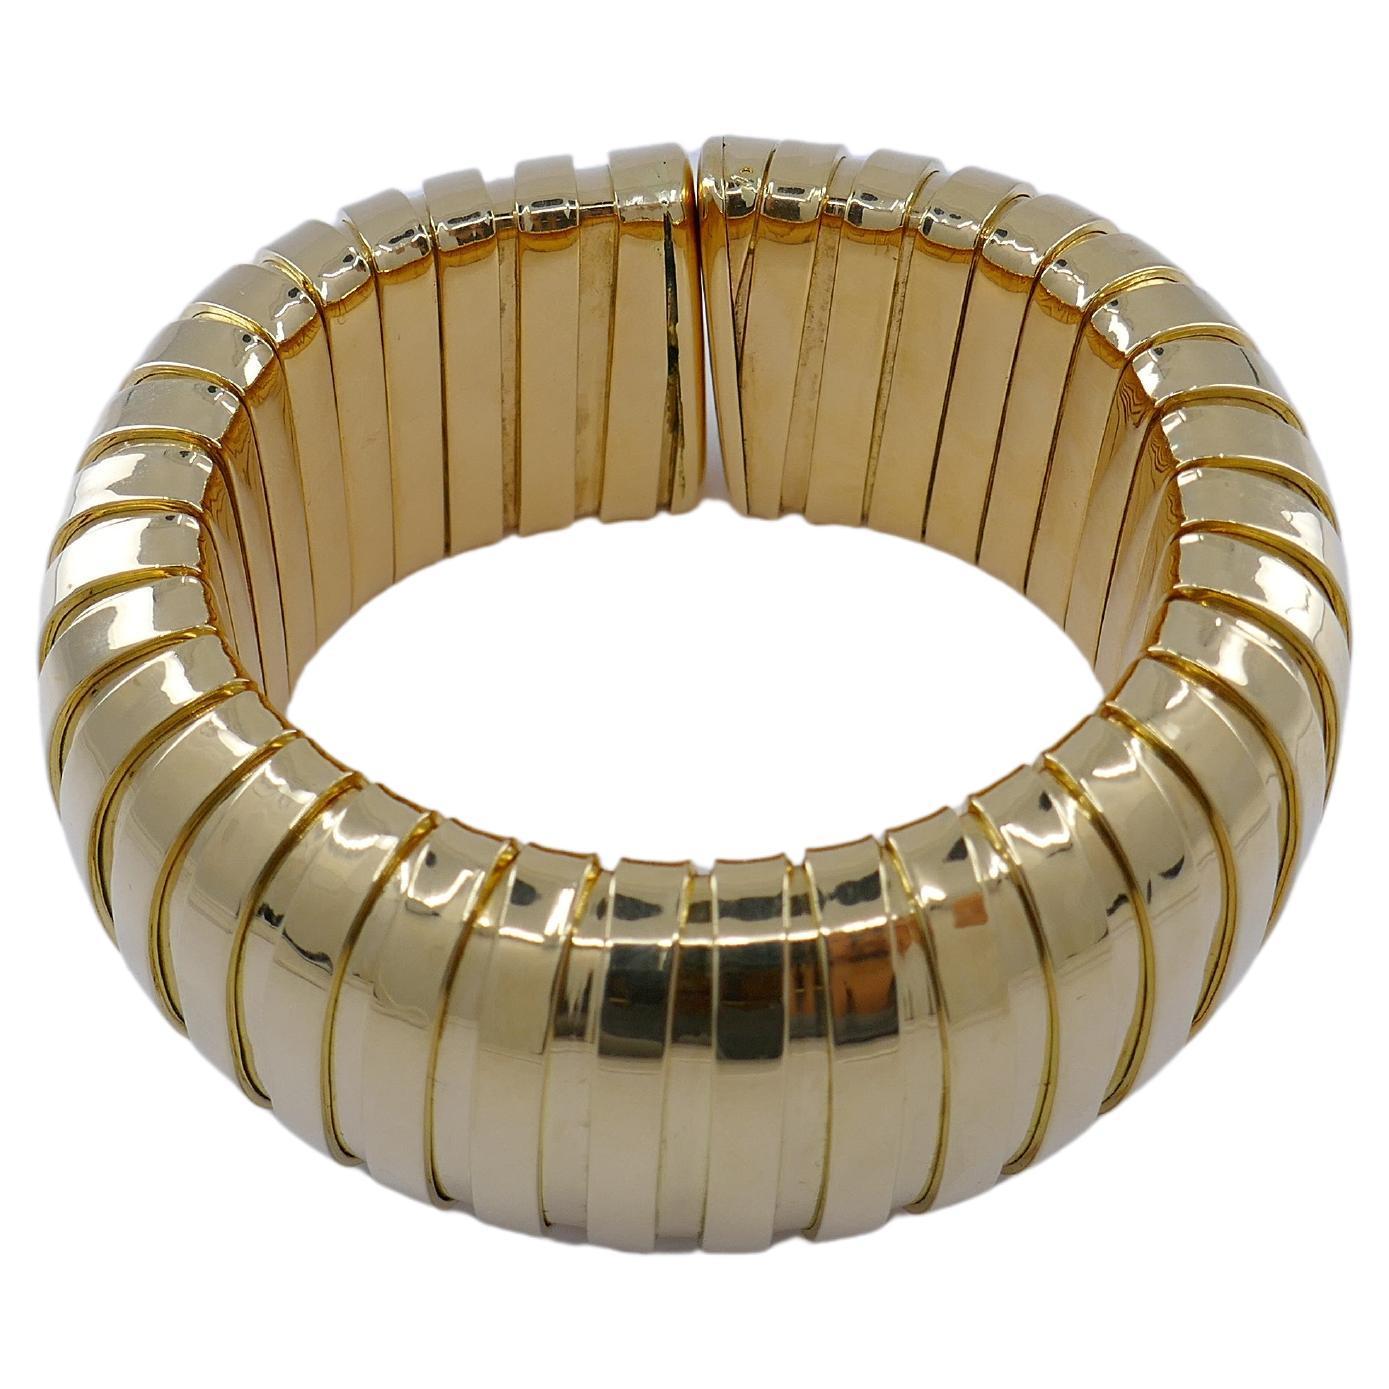 A vintage Carlo Weingrill Tubogas bracelet made of 18k gold.
it's a massive and shiny bangle that will turn heads. Wide Tubogas coils look amazing being crafted out of not-too-yellow, high-polished gold. A puffed shape of the bracelet adds to its